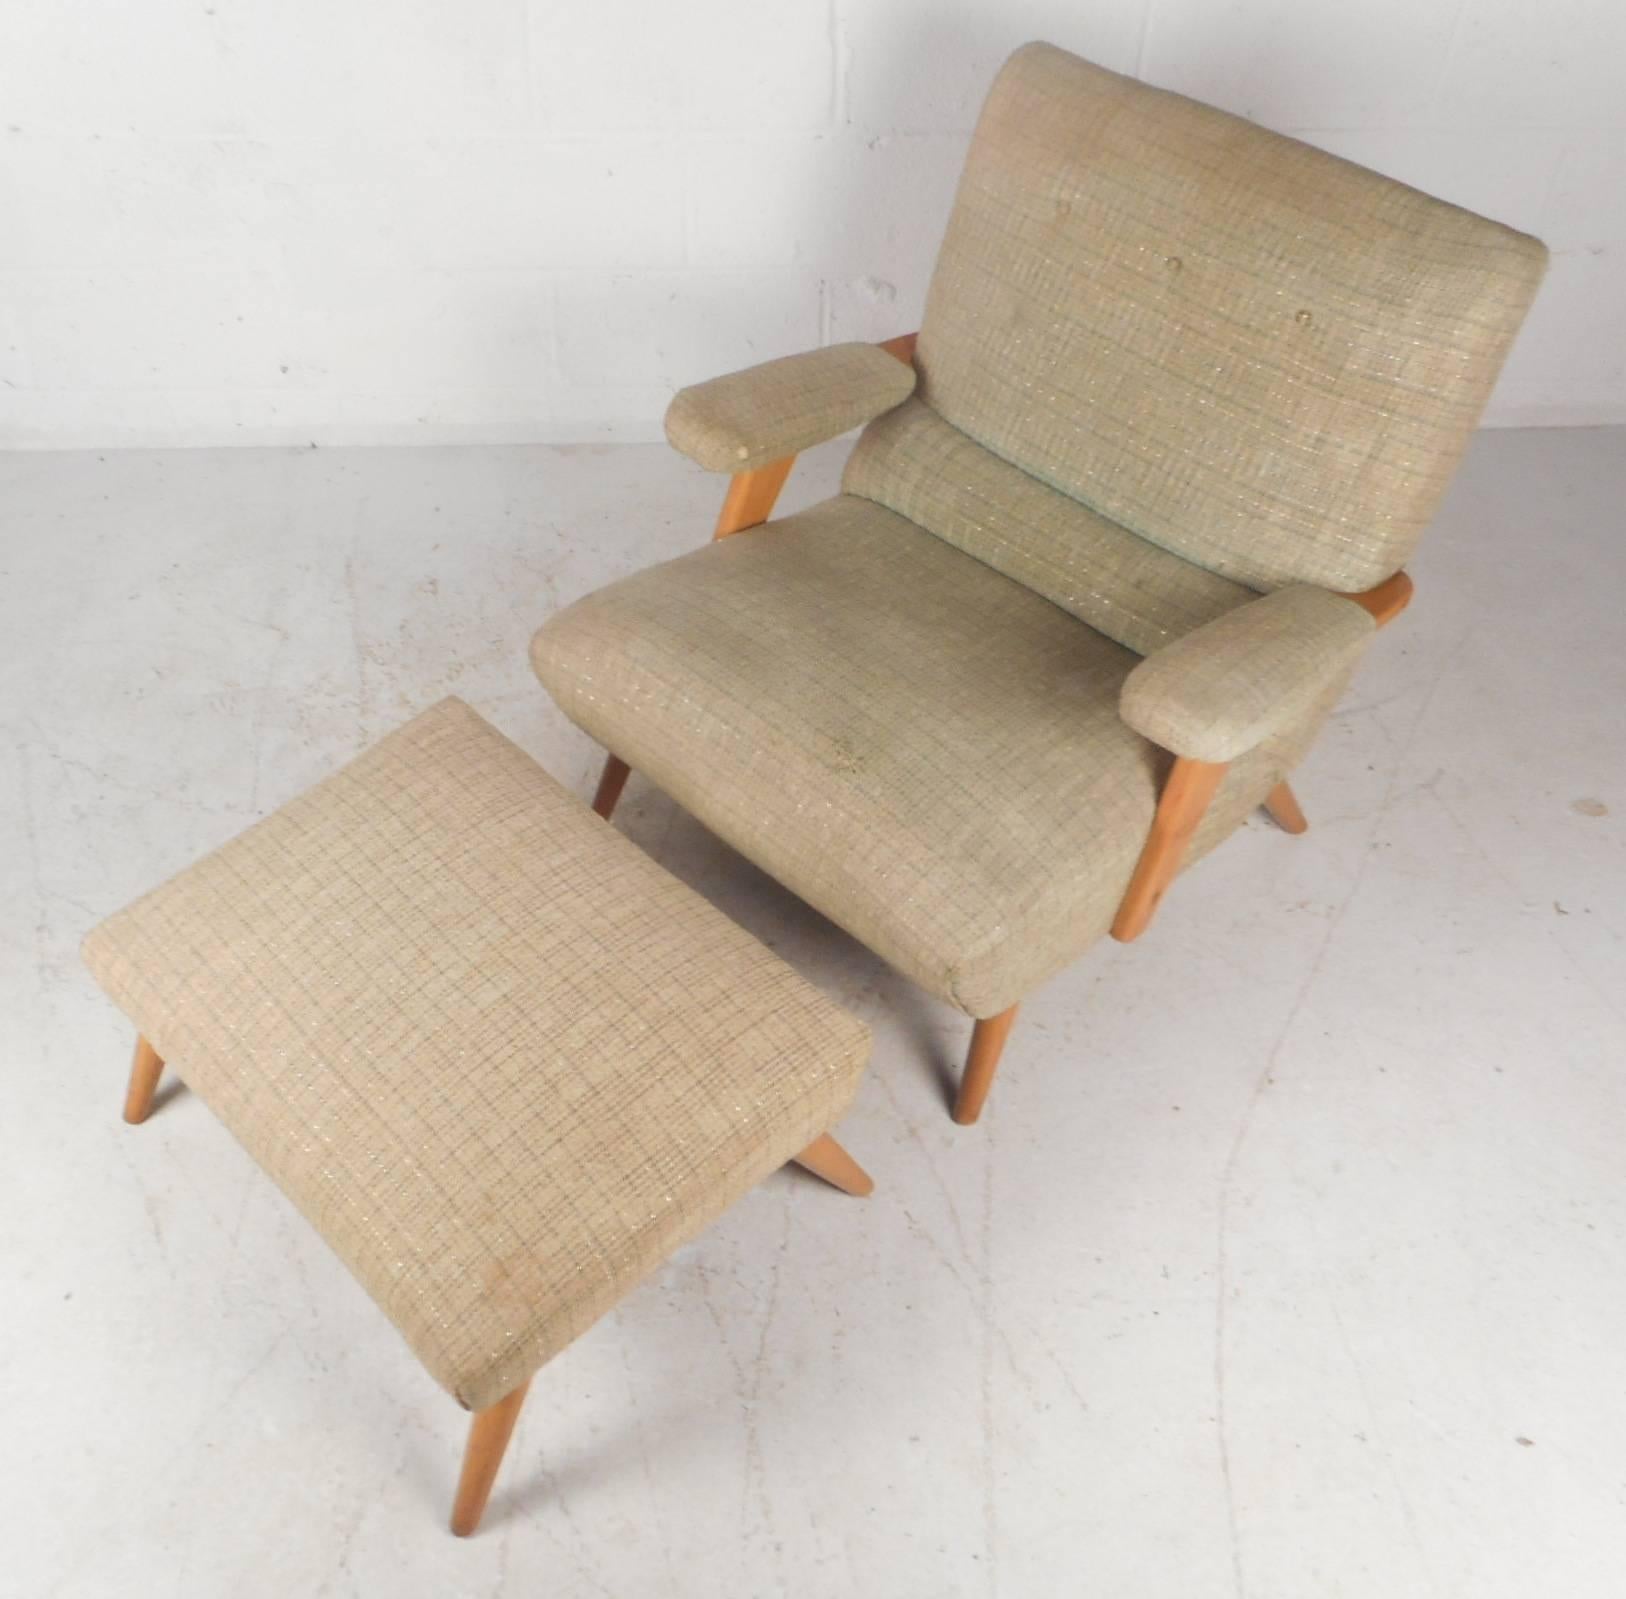 This gorgeous pair of vintage modern lounge chairs offers plenty of comfort with their thick padded seating and arm rests. Sleek design with angled and tapered legs made of solid maple wood. Unique and stylish lounge chairs with wide upholstered arm